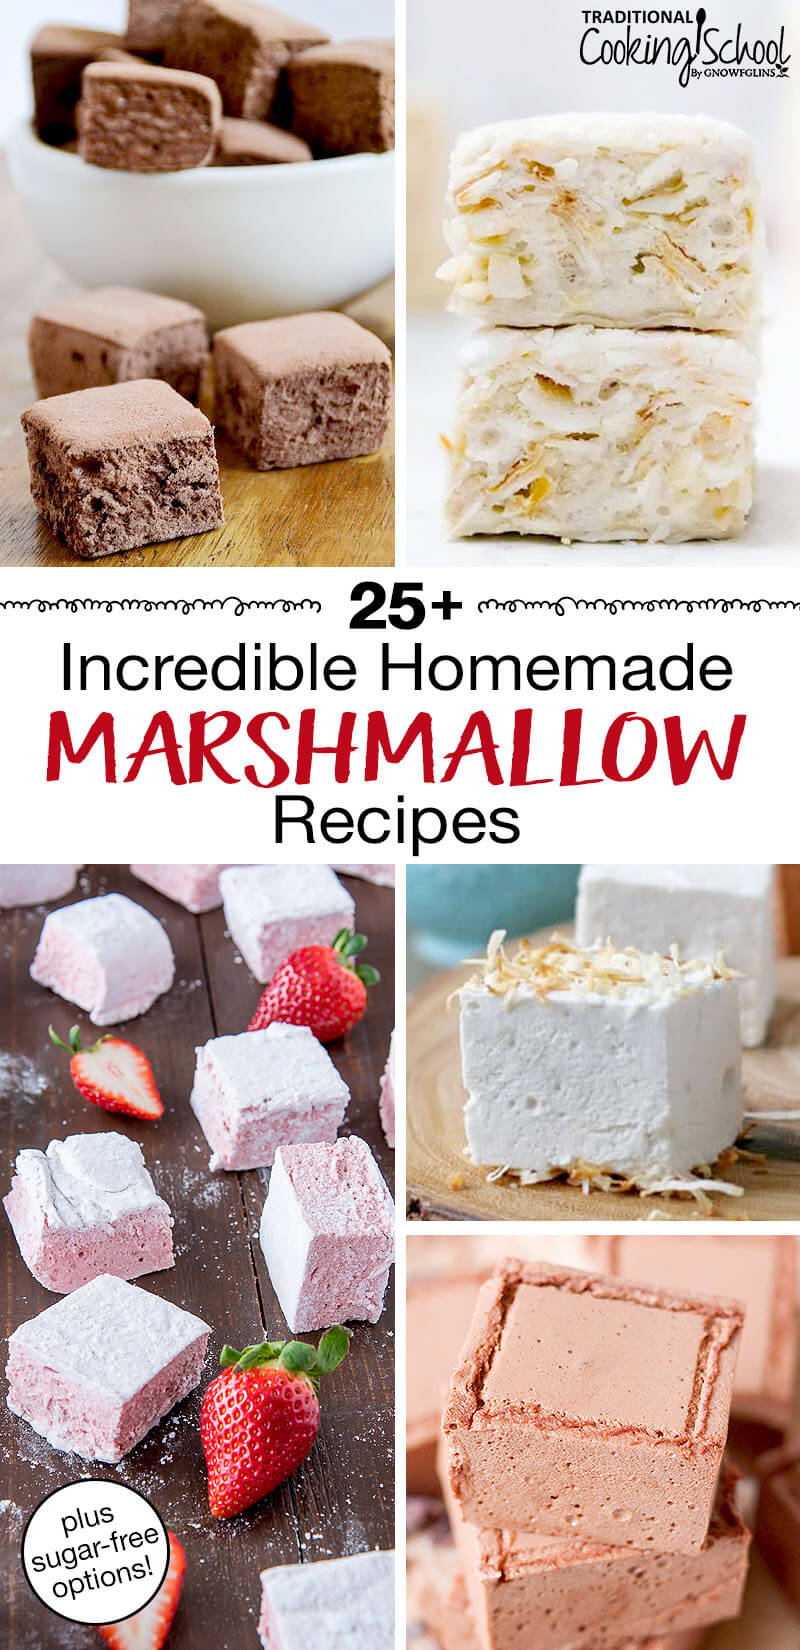 photo collage of uniquely flavored marshmallows and marshmallow desserts, including grain-free rice crispy treats, with text overlay: "25+ Incredible Homemade Marshmallow Recipes (plus sugar-free options!)"